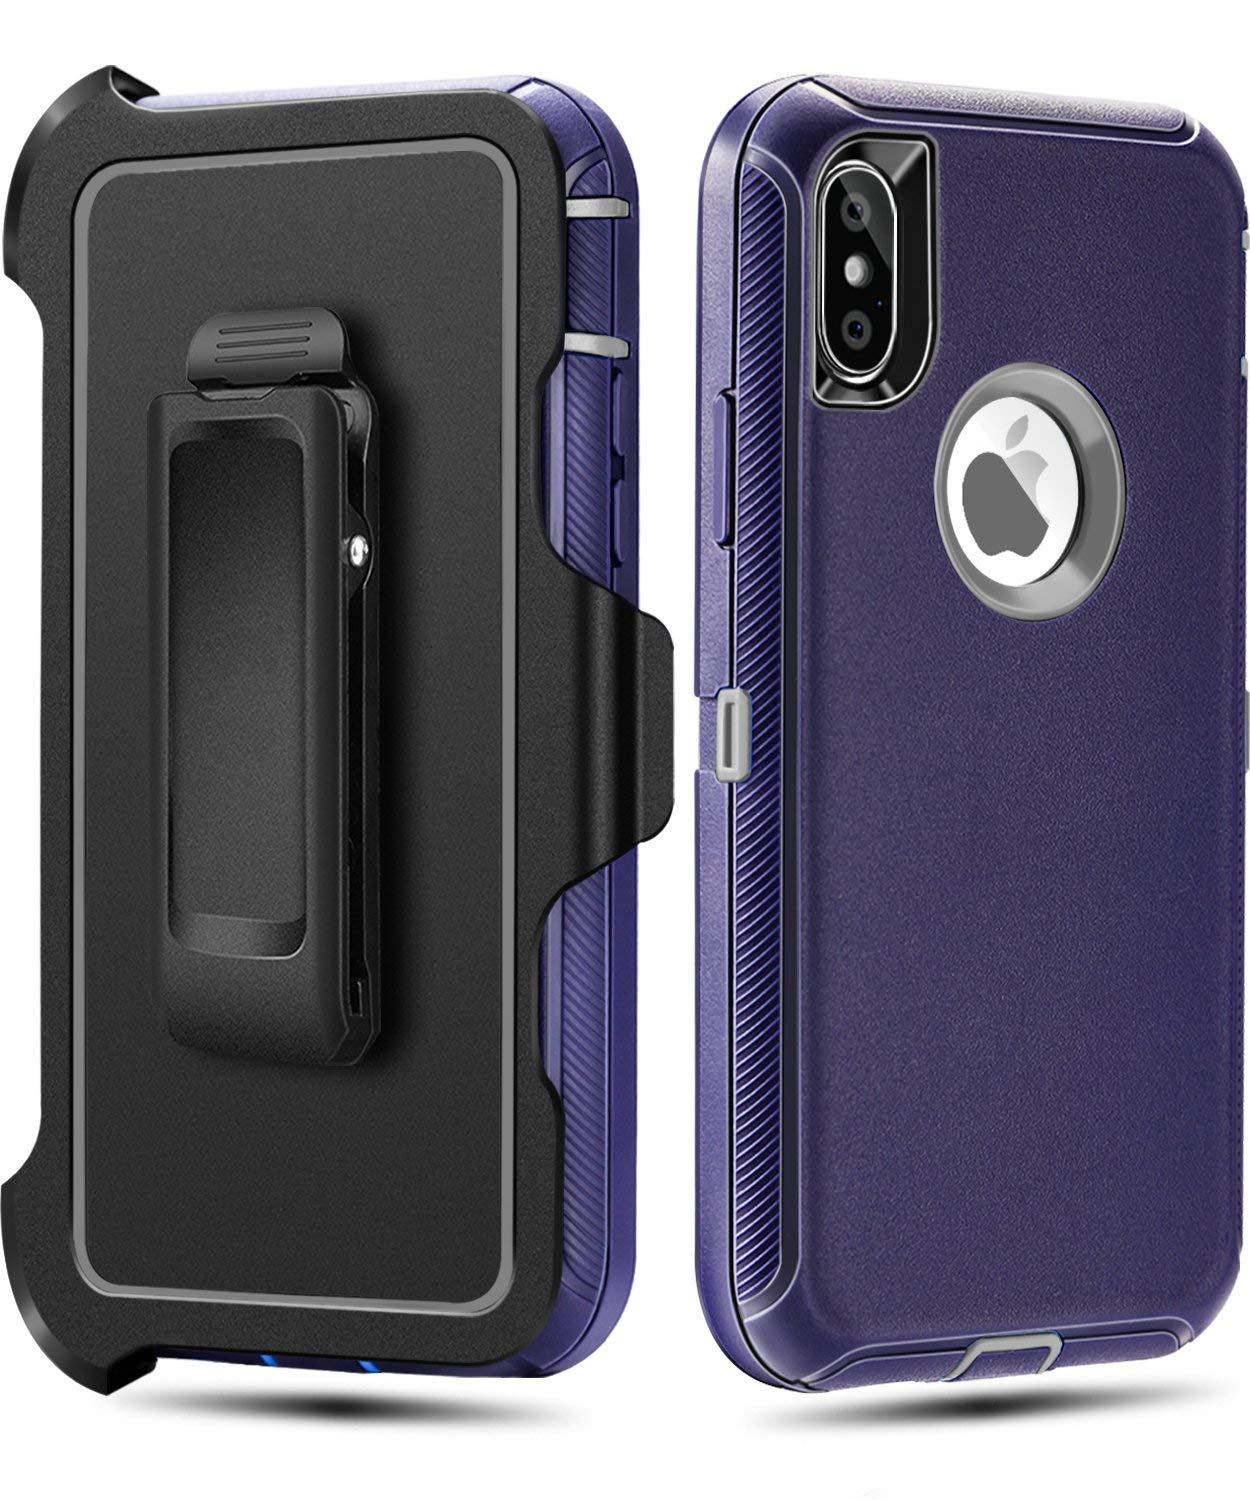 iPhone XS,iPhone X Case,FOGEEK Belt Clip Holster Heavy Duty Kickstand Cover [Support Wireless Charging] [Dust-Proof] [Shockproof] Compatible for Apple iPhone XS, iPhone X, 5.8 inch  (Navy Blue and Grey) …